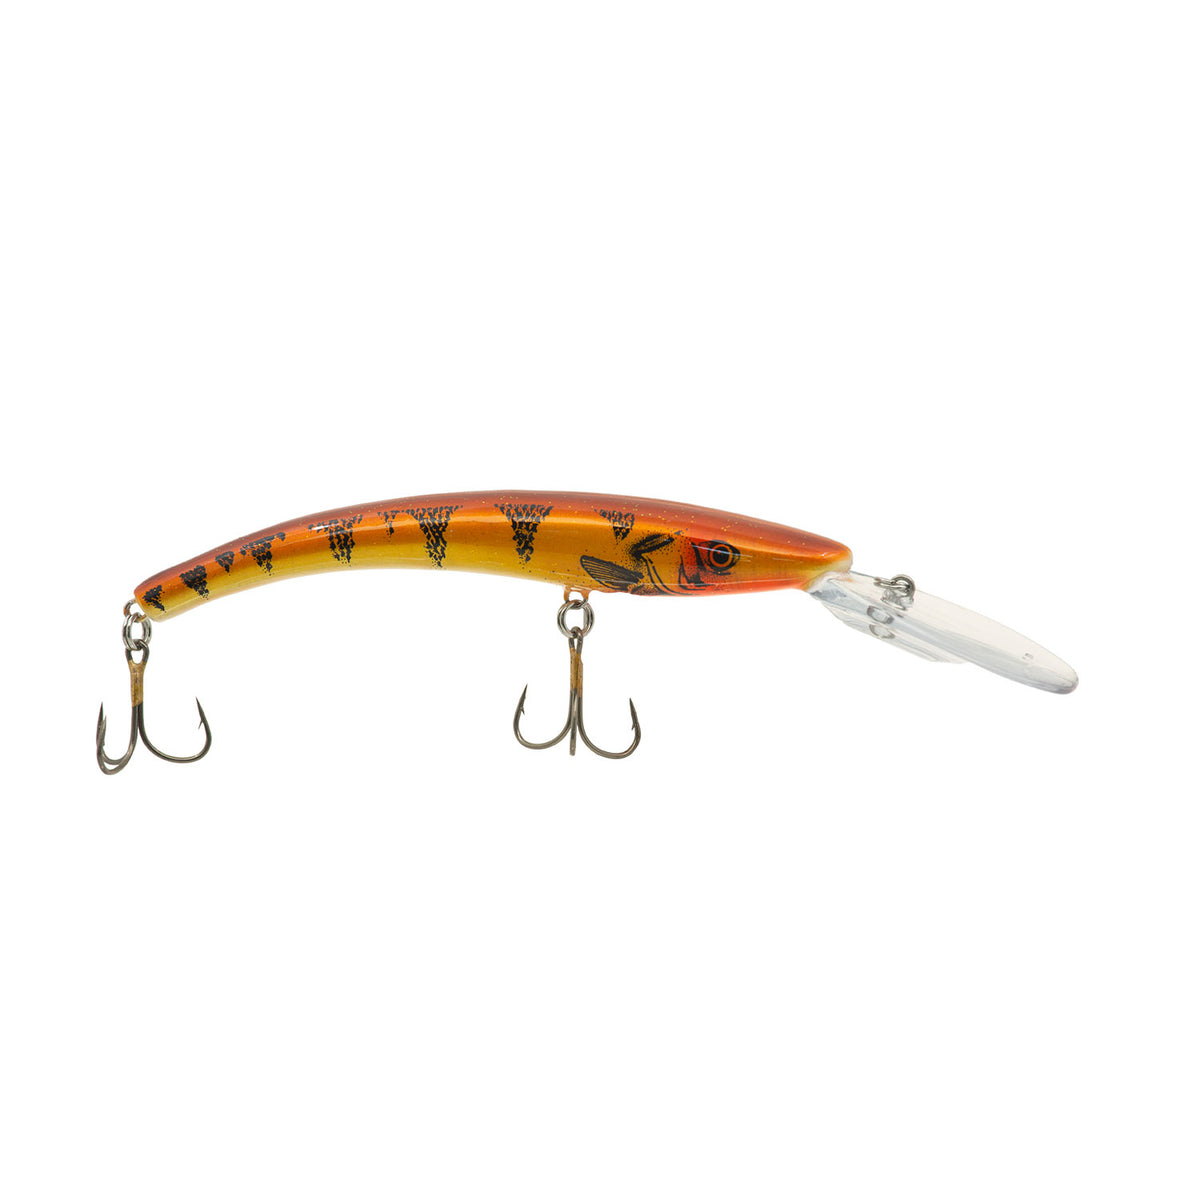 Road Runner Lures - Change Road Runner profiles. Changing the frequency  that fish feel on their lateral lines will induce strikes. Once you find  the right one, it just makes the trip